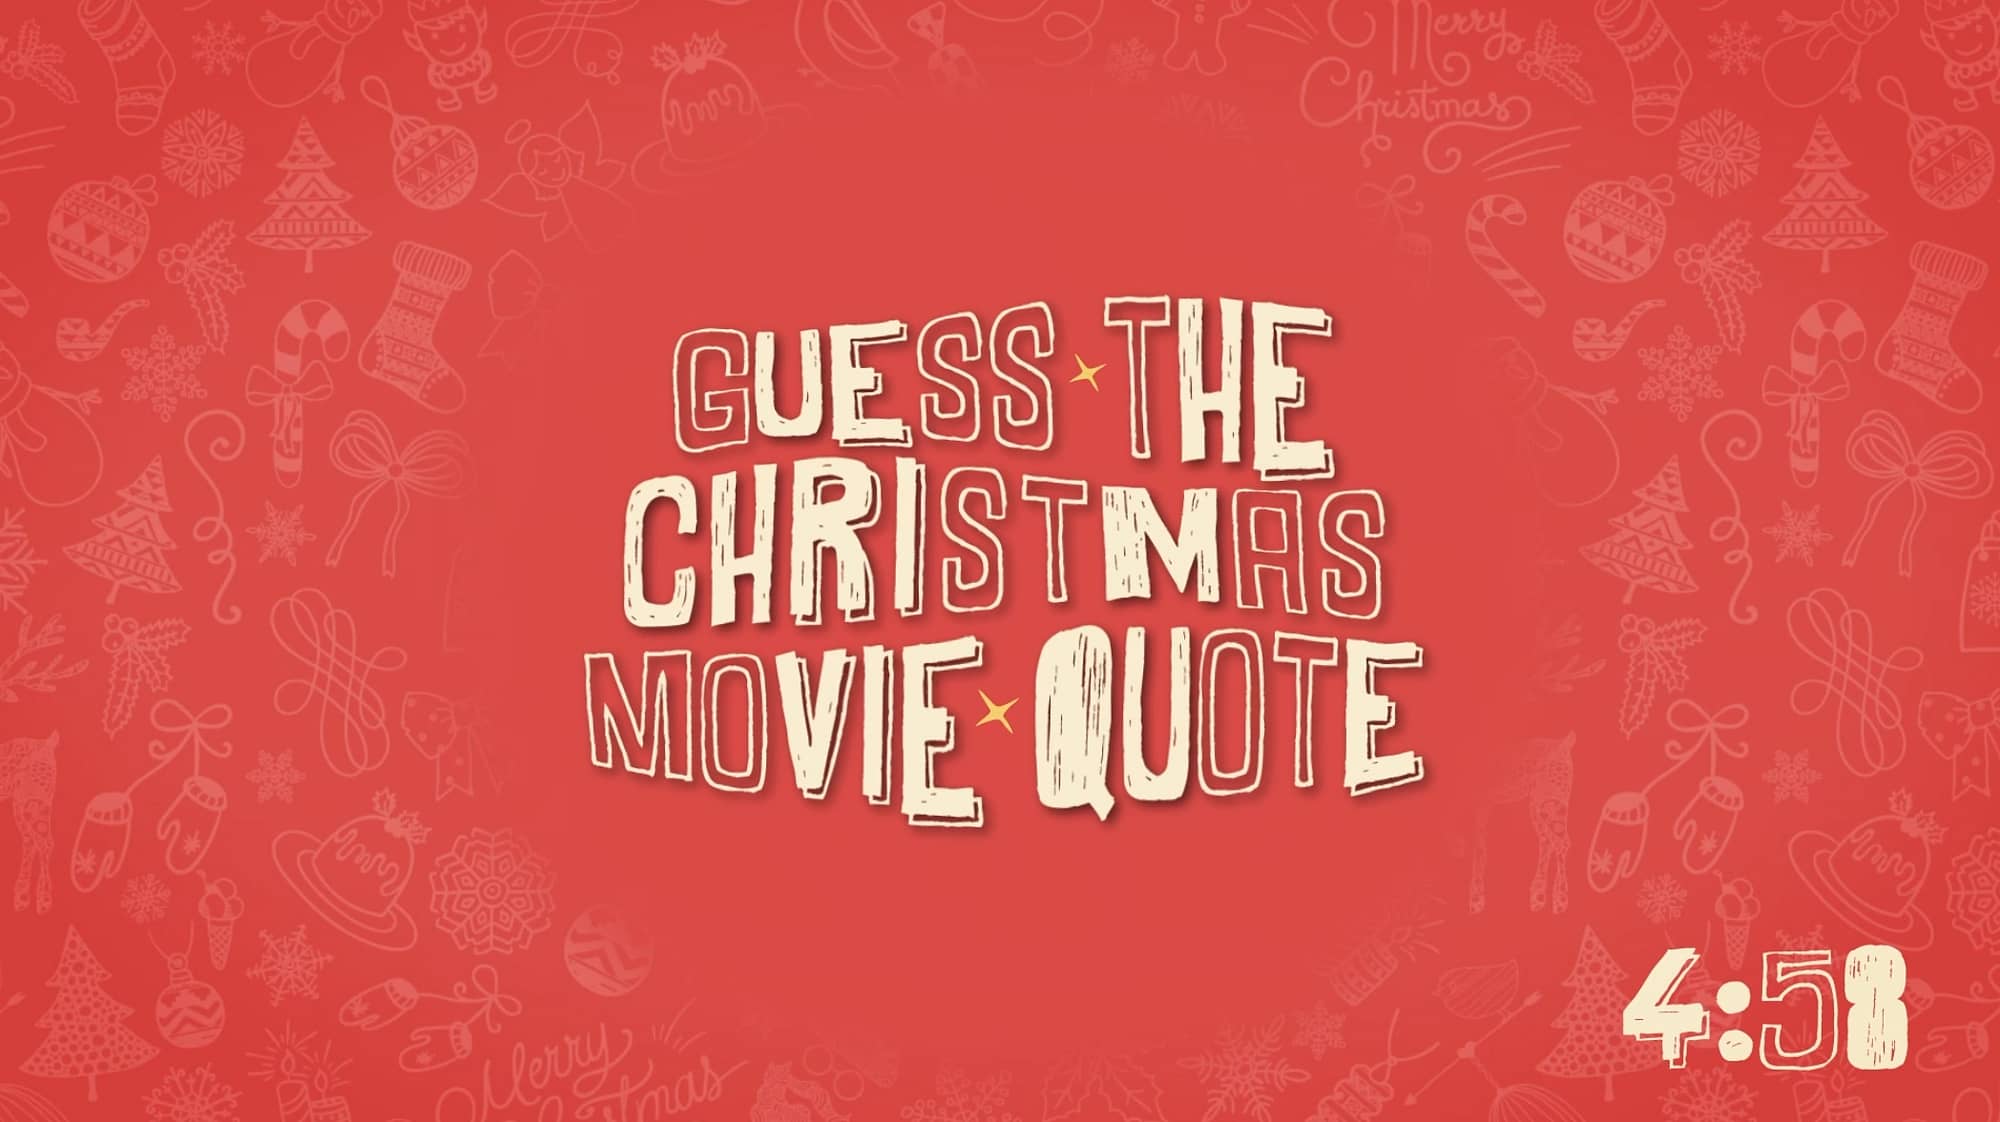 Guess the Christmas Movie Quote: Countdown by Twelve Thirty Media